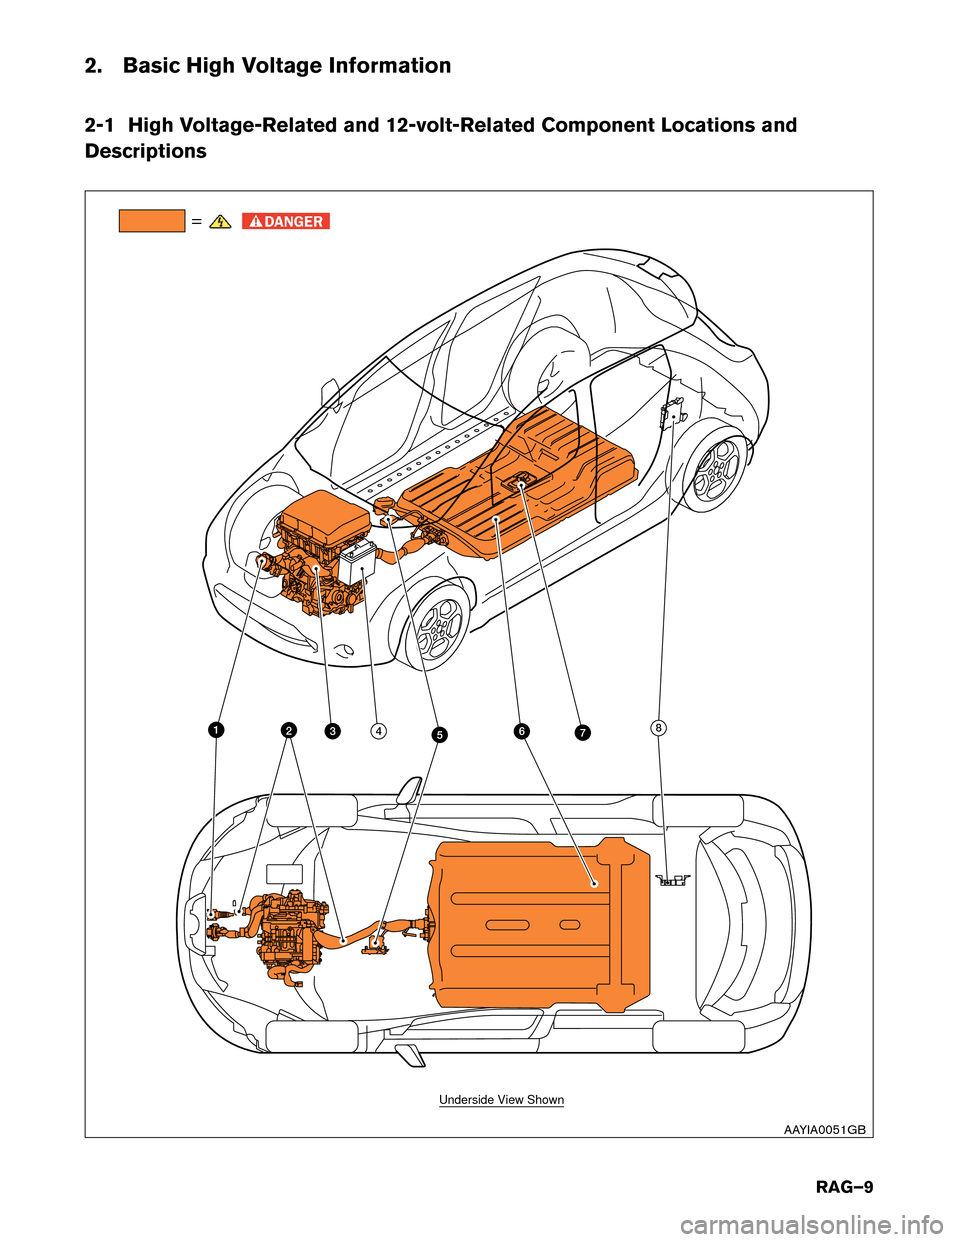 NISSAN LEAF 2016 1.G Roadside Assistance Guide 2. Basic High Voltage Information
2-1
High Voltage-Related and 12-volt-Related Component Locations and
Descriptions =
76
342 8
5 1
Underside View Shown
AAYIA0051GB
RAG–9  